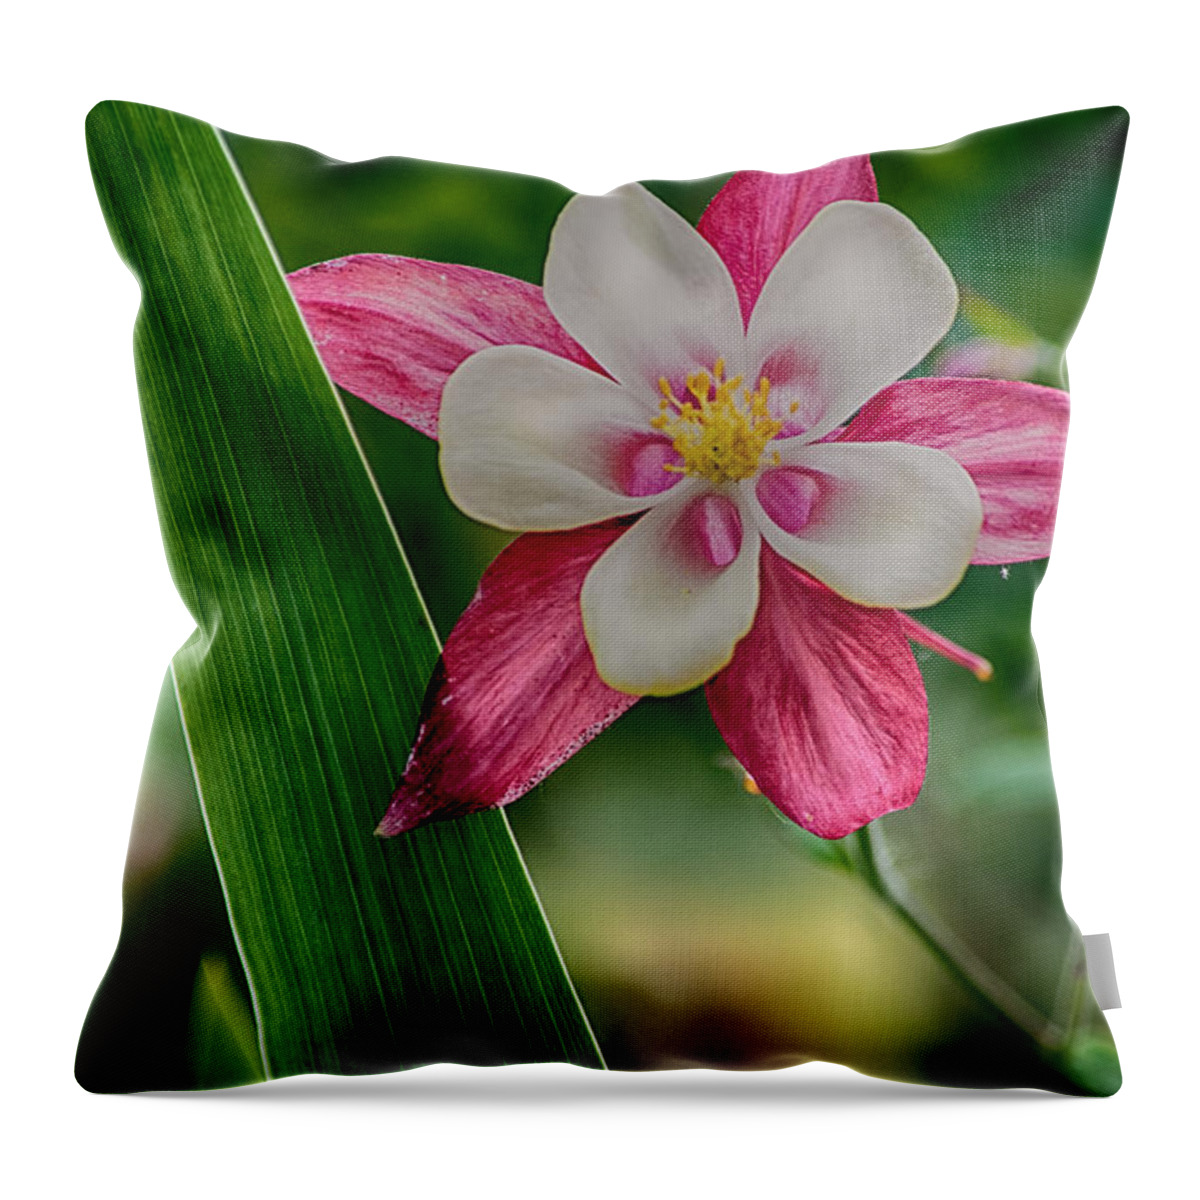 Pink Flower Throw Pillow featuring the photograph Pink Perfection by Bonnie Bruno